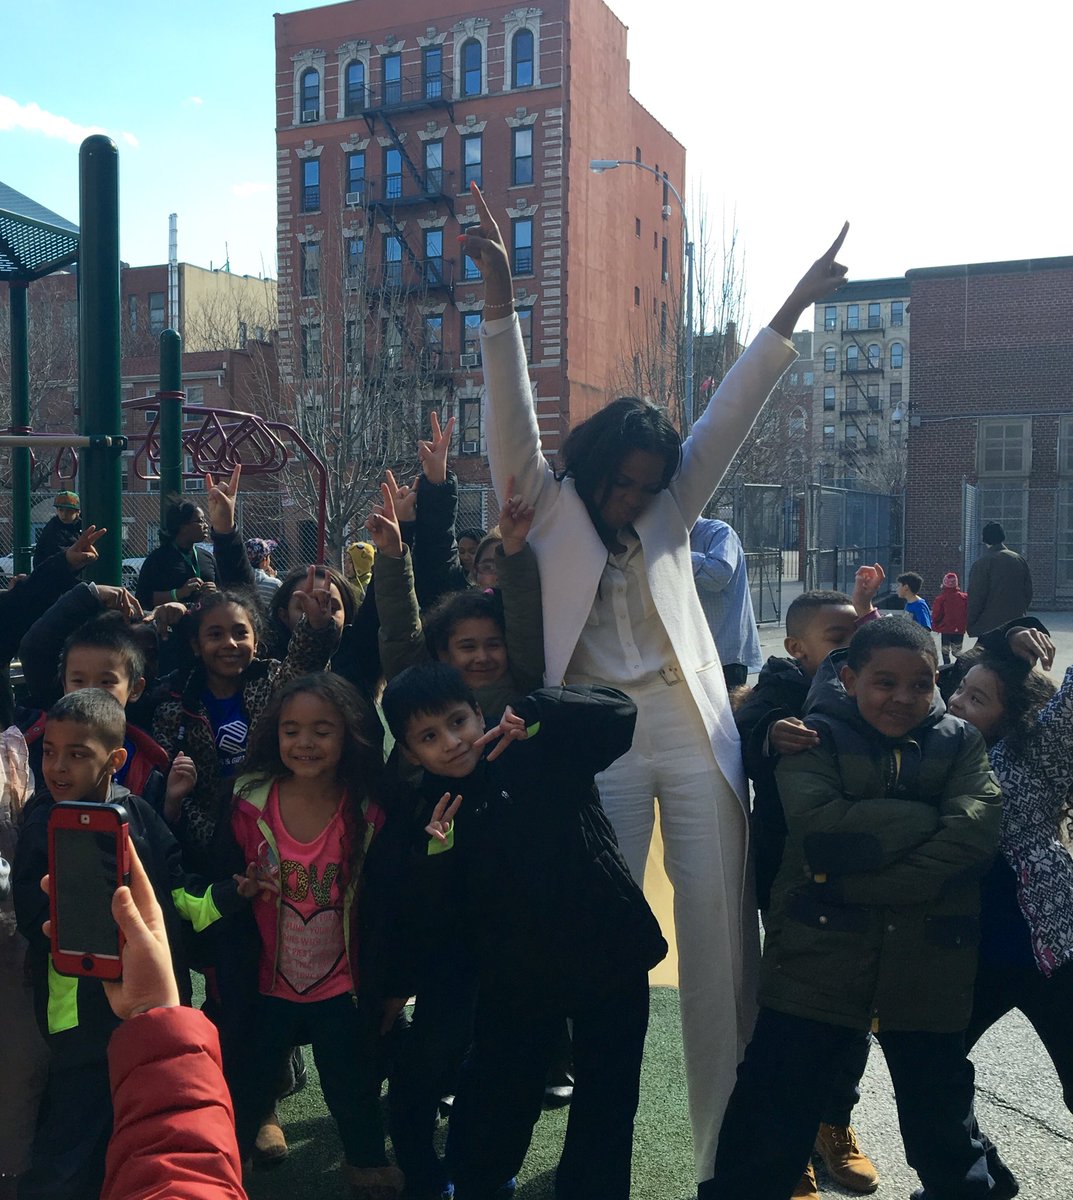 RT @EdAlliance: #Rockstar @KELLYROWLAND poses with our young future rockstars in our outdoor space at PS 64. Our kids love her! https://t.c…